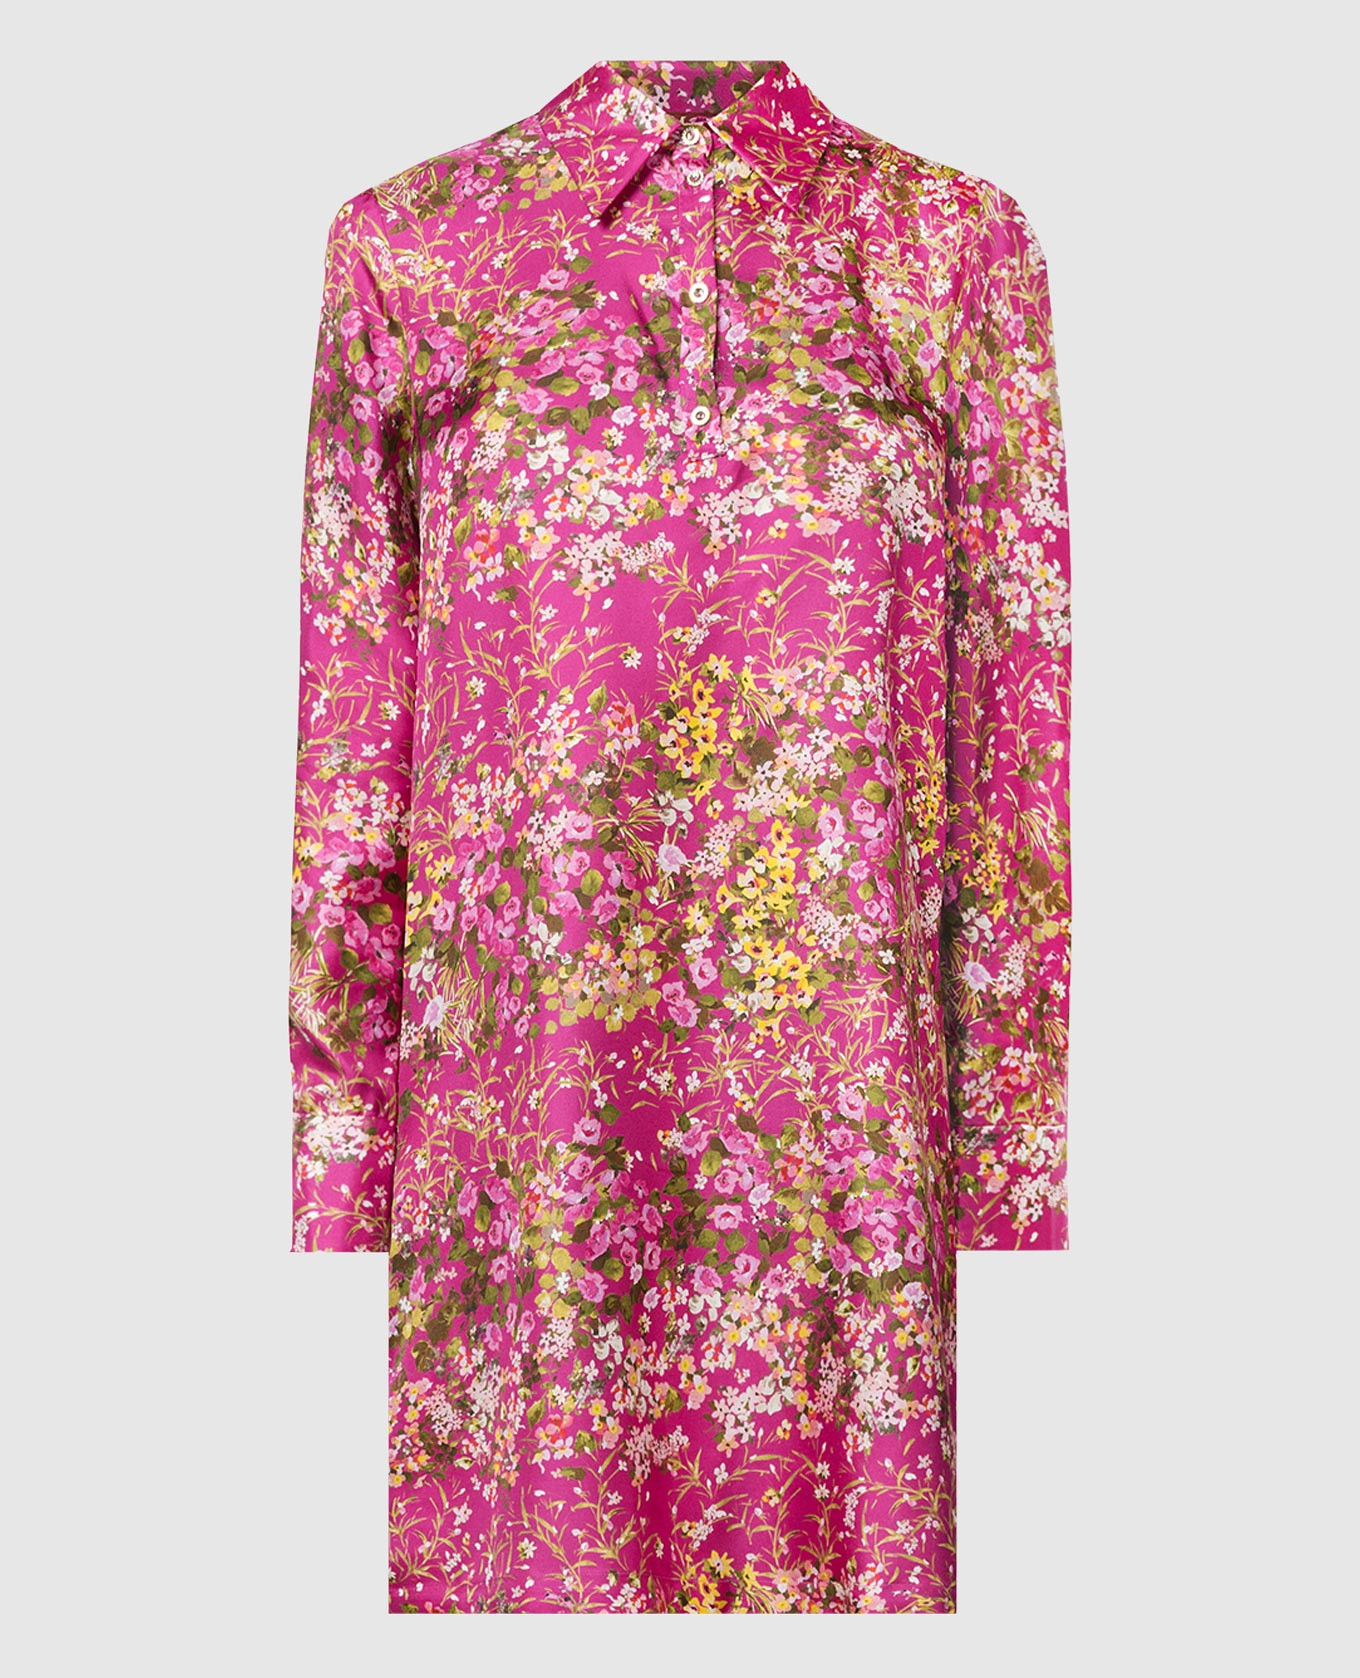 ORAZIO pink dress made of silk with a floral print